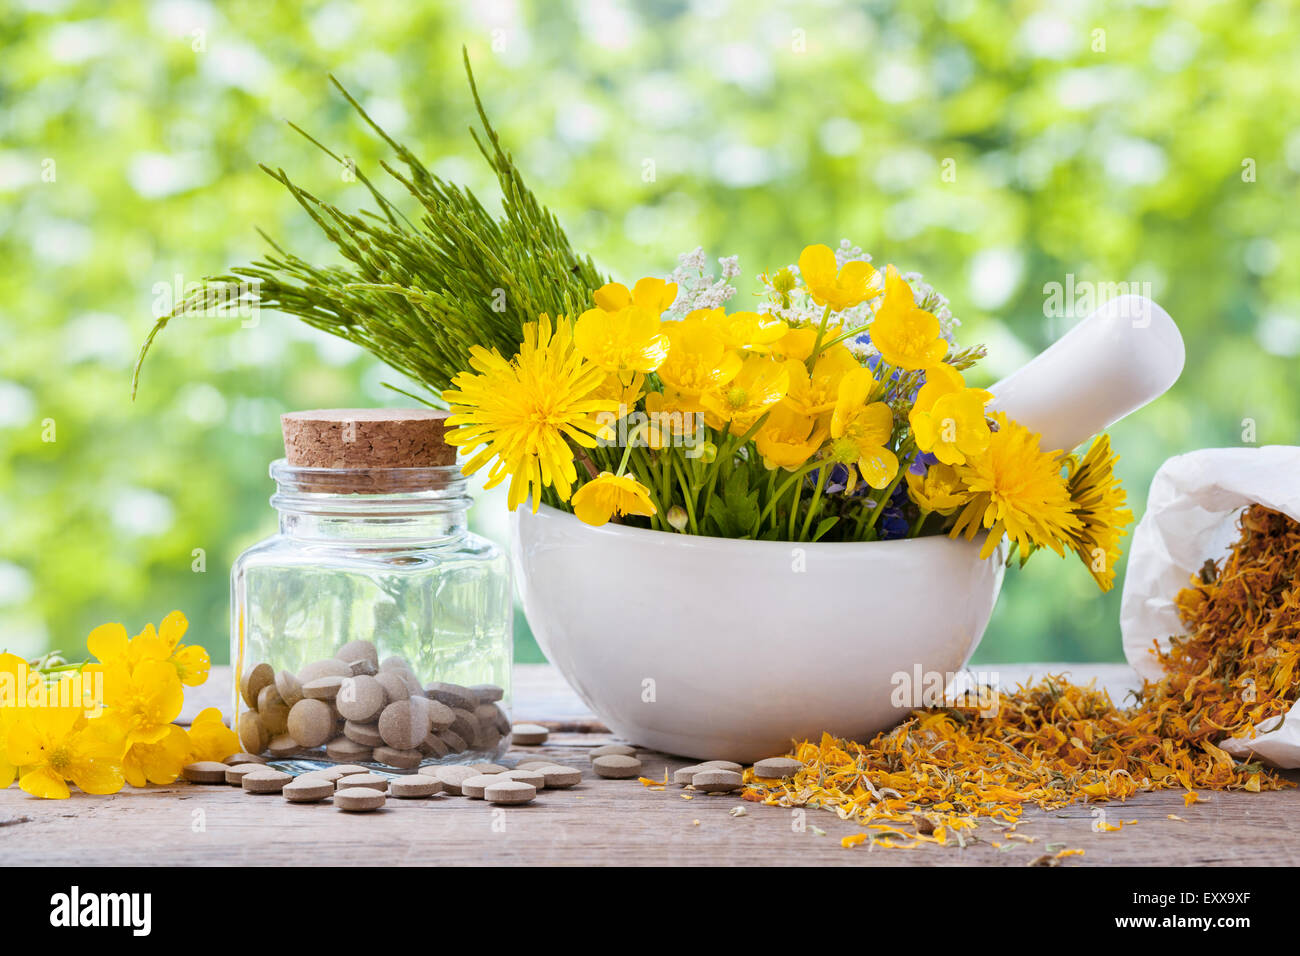 Healing herbs in mortar and bottle of pills on rustic table, herbal medicine. Stock Photo